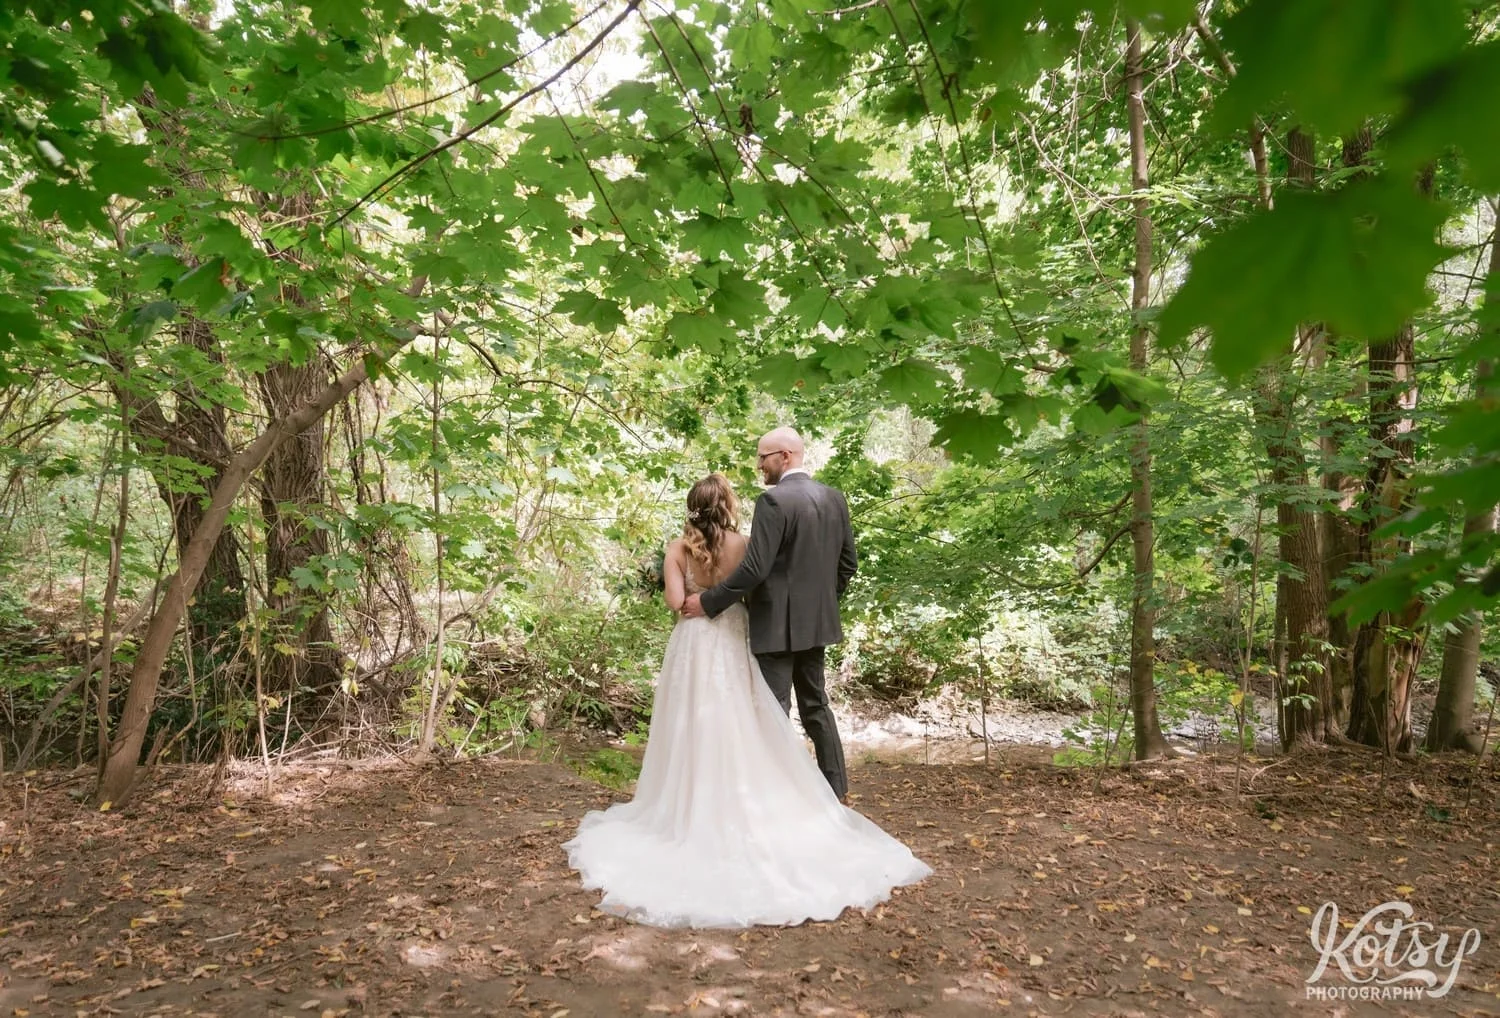 A wide shot of a groom in a gray suit holding his bride in a white bridal gown looking away from the camera at West Deane Park in Toronto, Canada